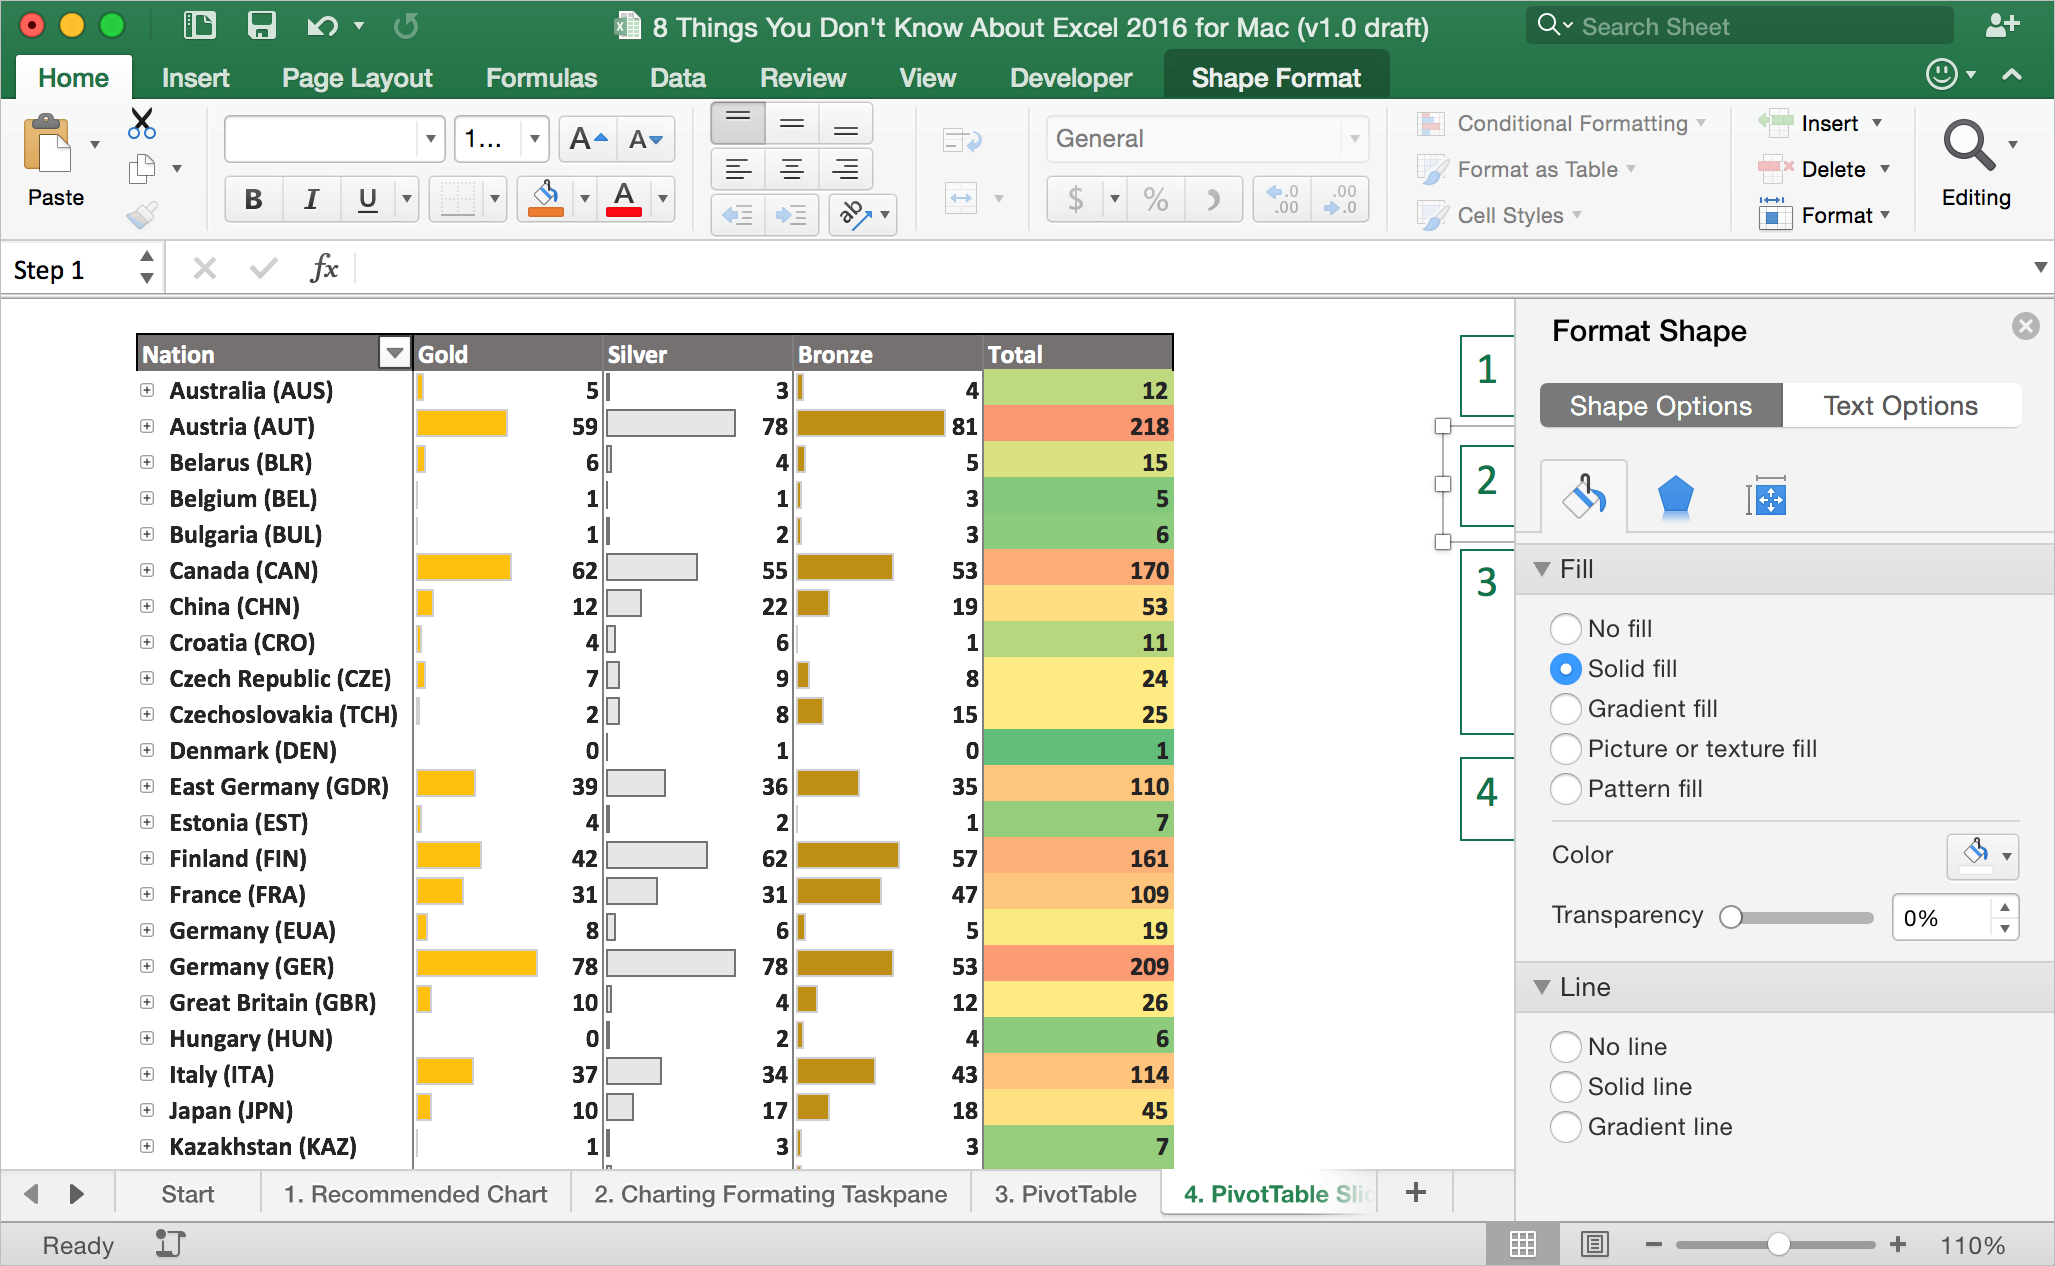 microsoft excel 2016 for mac formats time as decimal not time